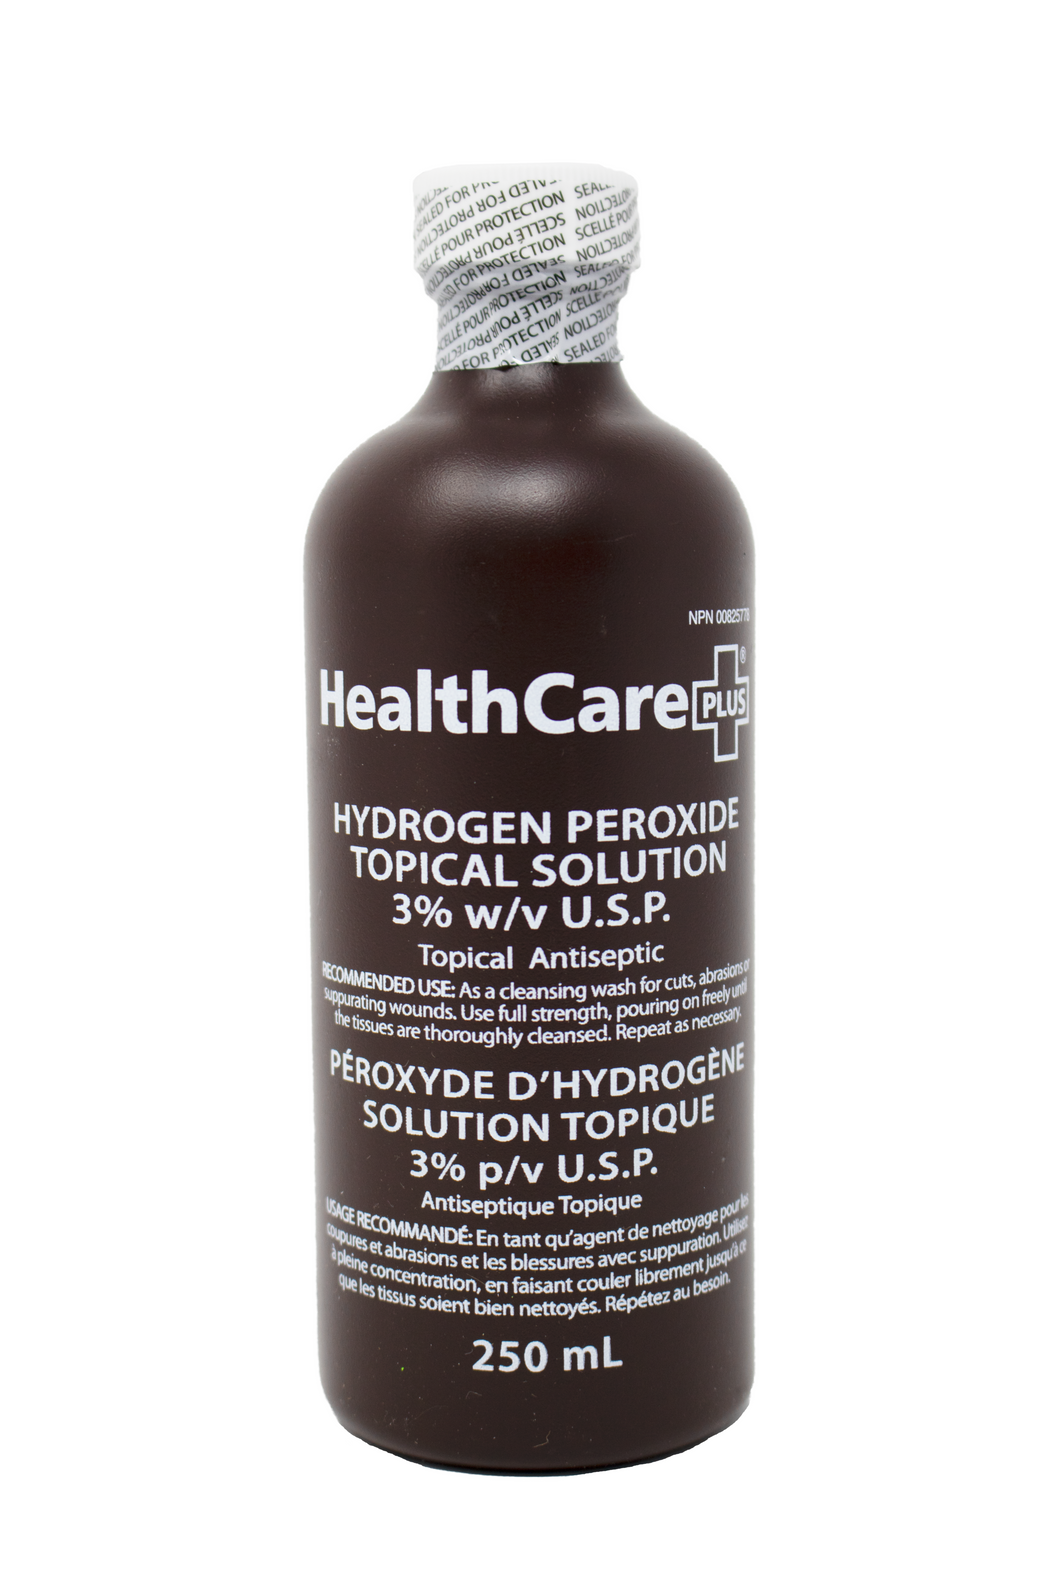 HealthCare Plus Hydrogen Peroxide Topical Solution 3% w/v U.S.P. (500ml)